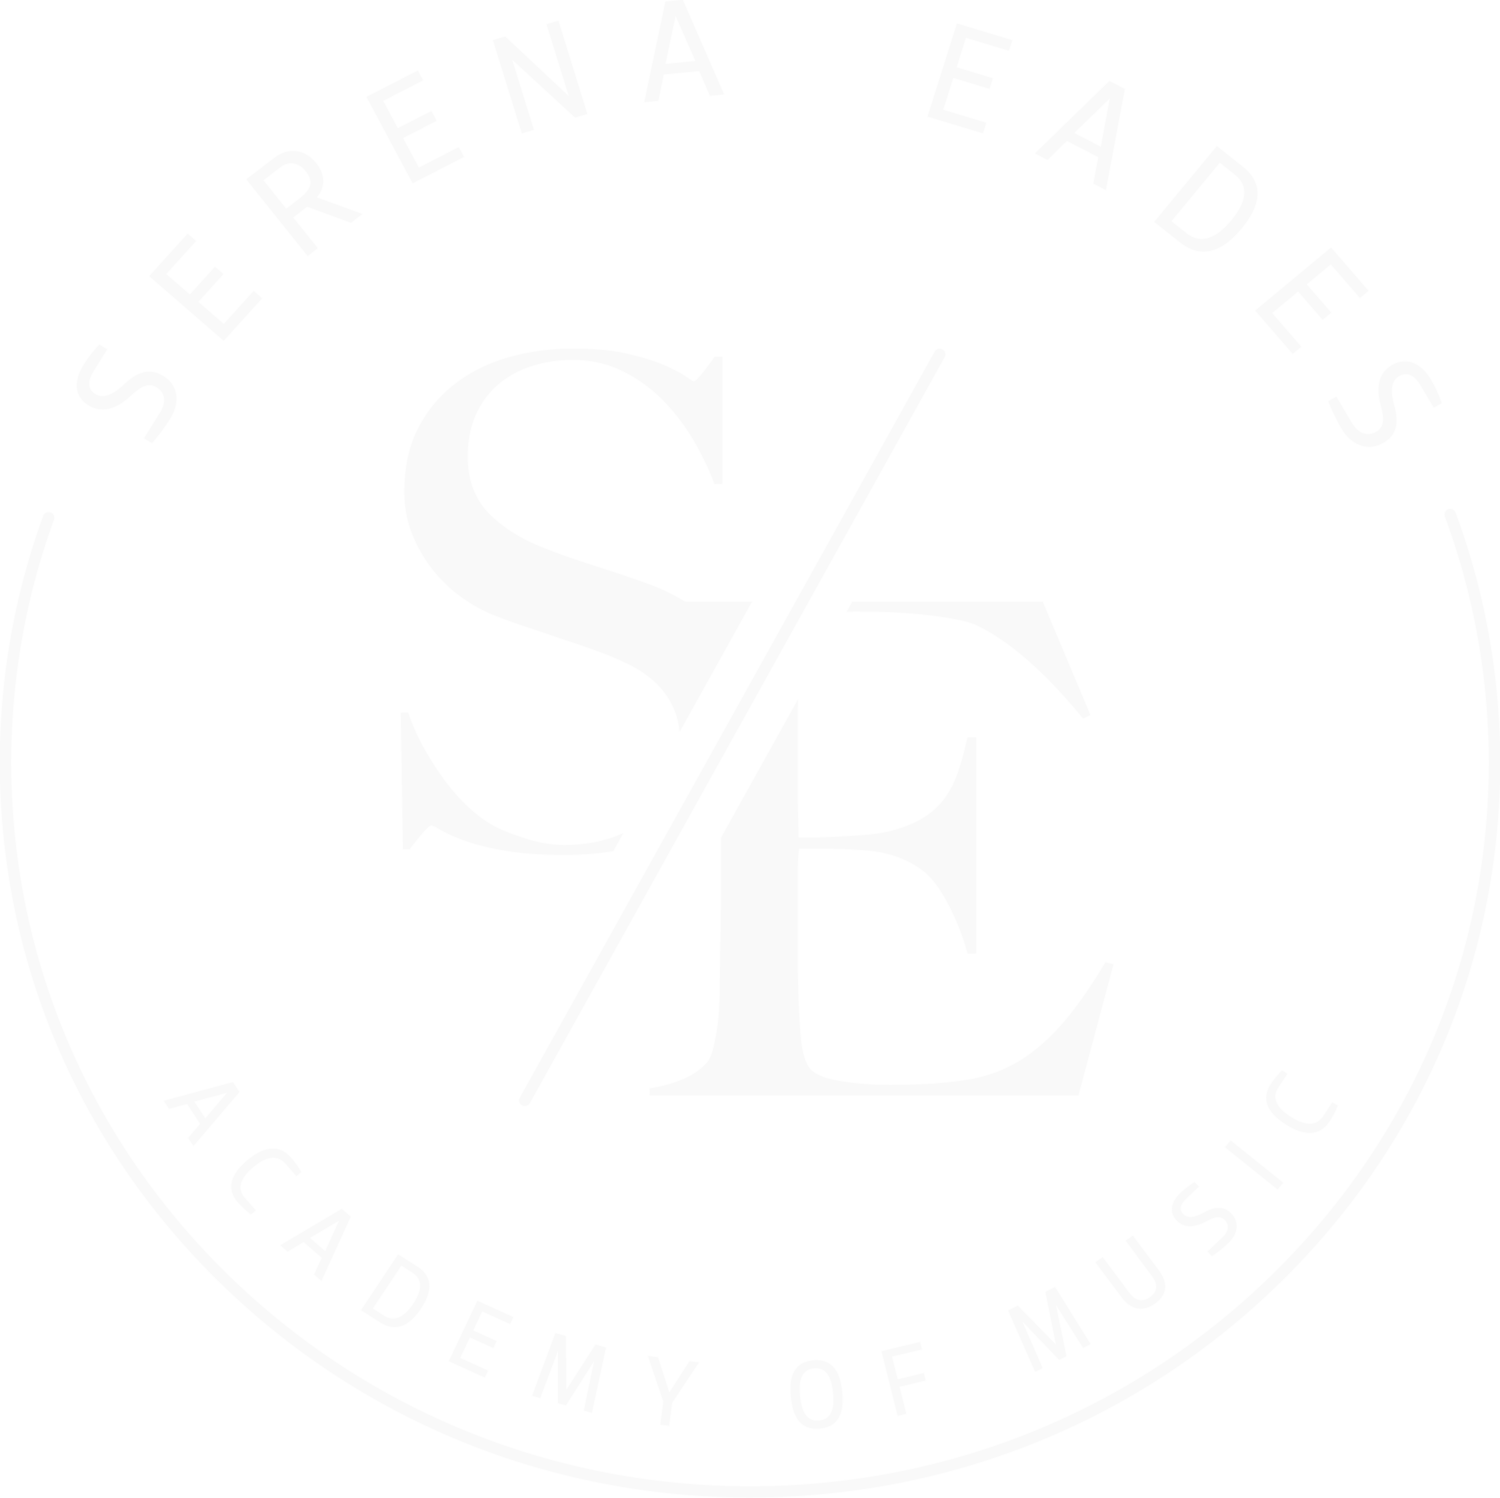 Serena Eades Academy of Music Online &amp; In-Person Violin Lessons